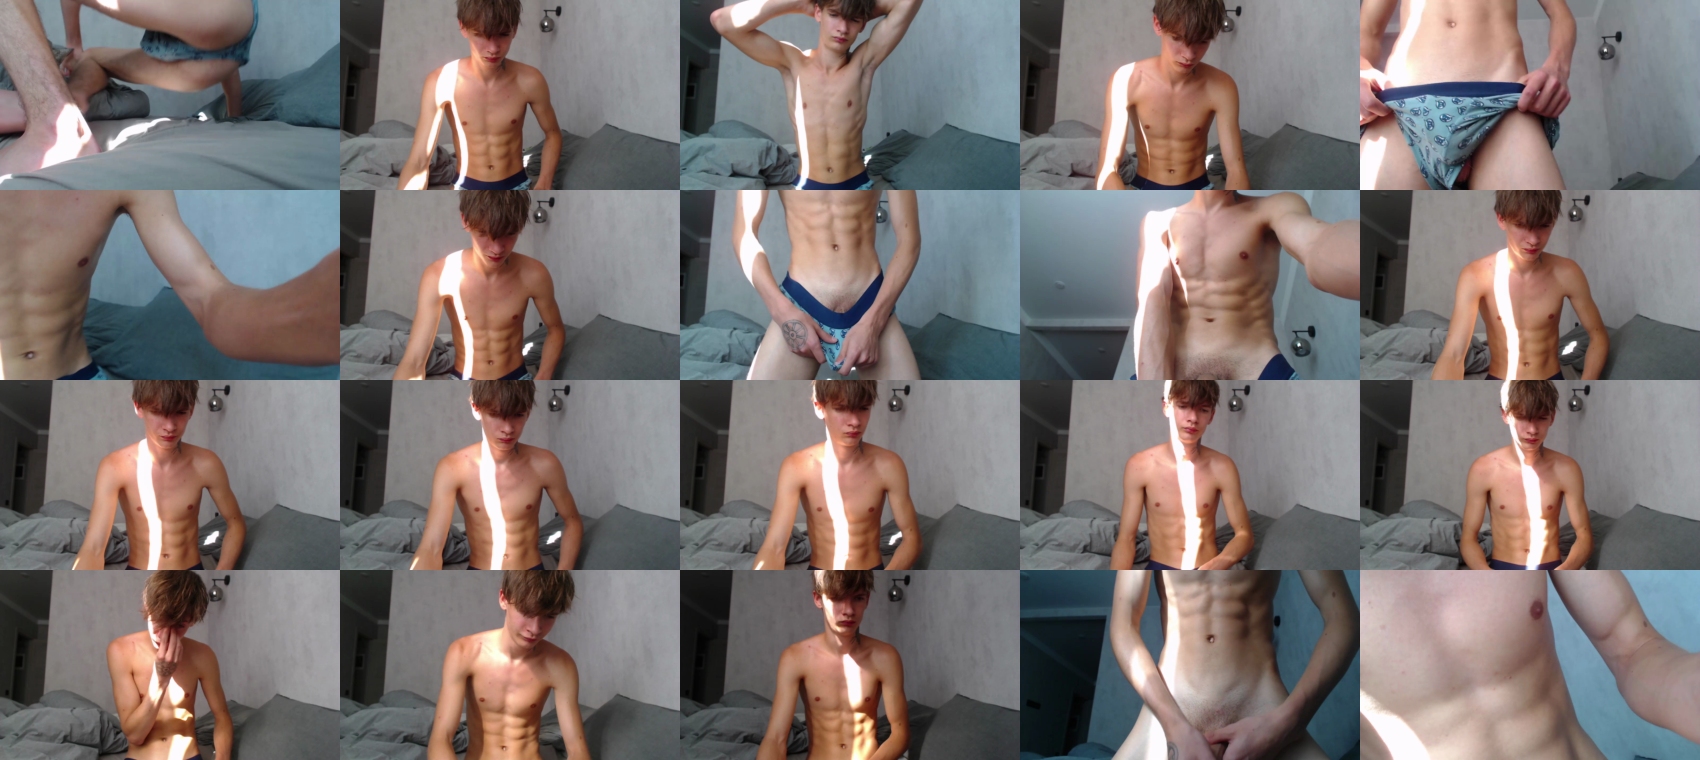 franky_twink  28-08-2022 video gay